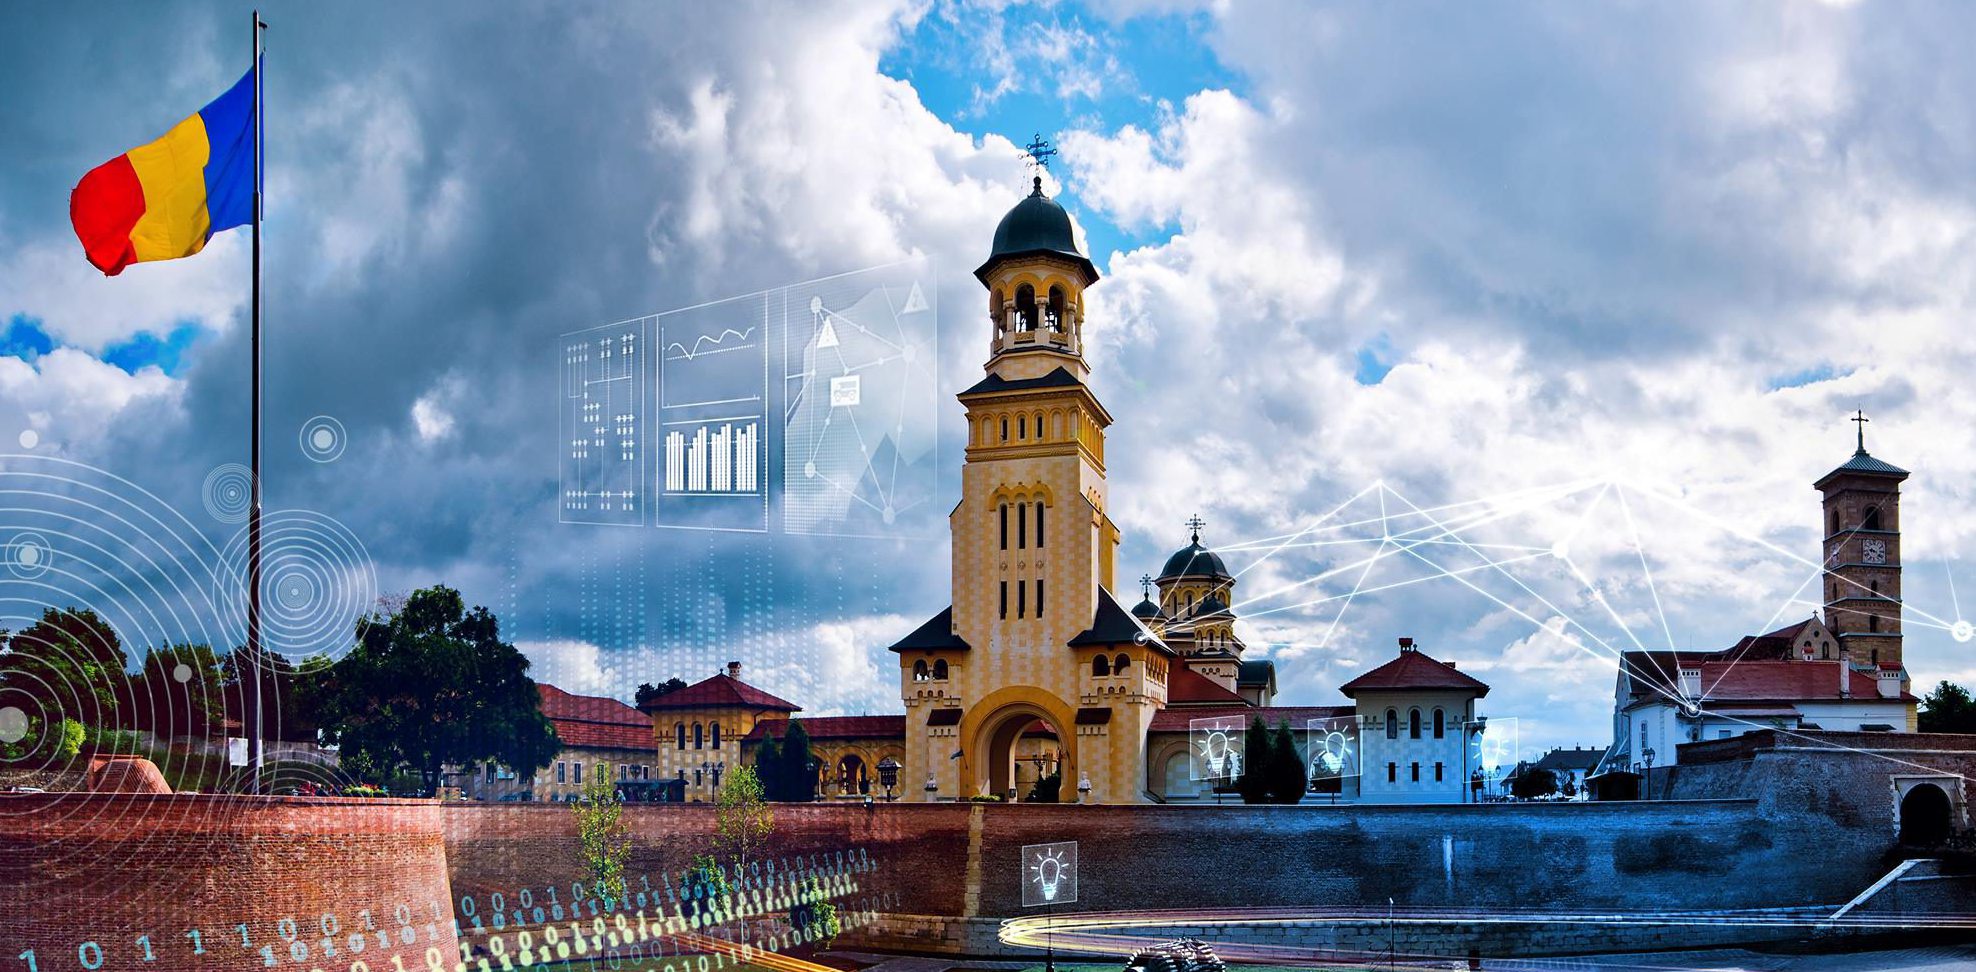 Developers in Romania: Insight into Their Culture and IT Market